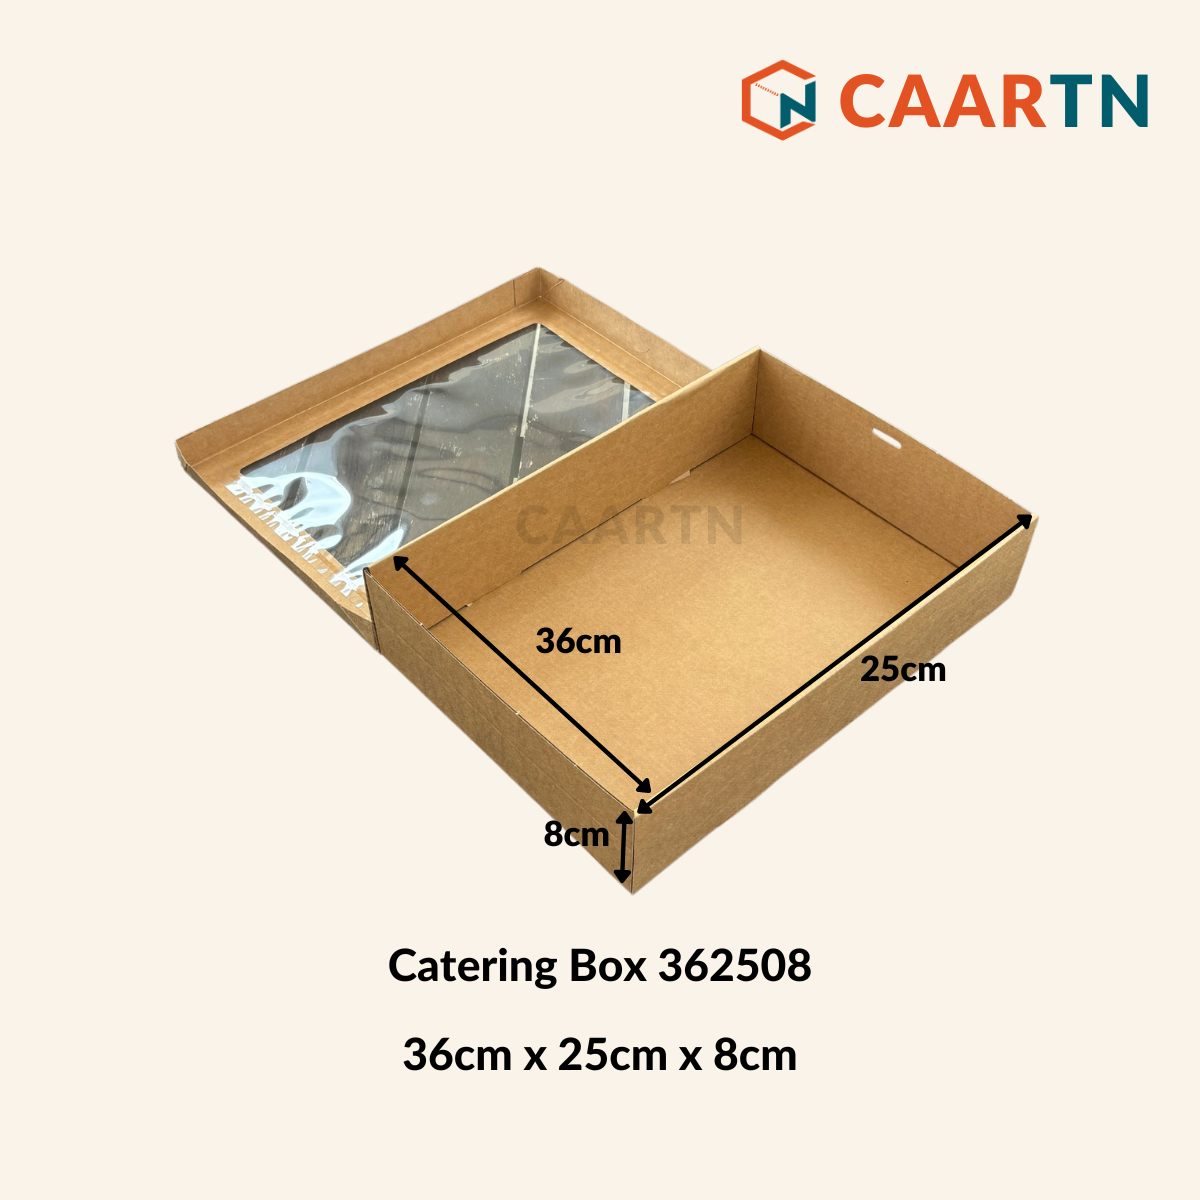 Catering Box 362508